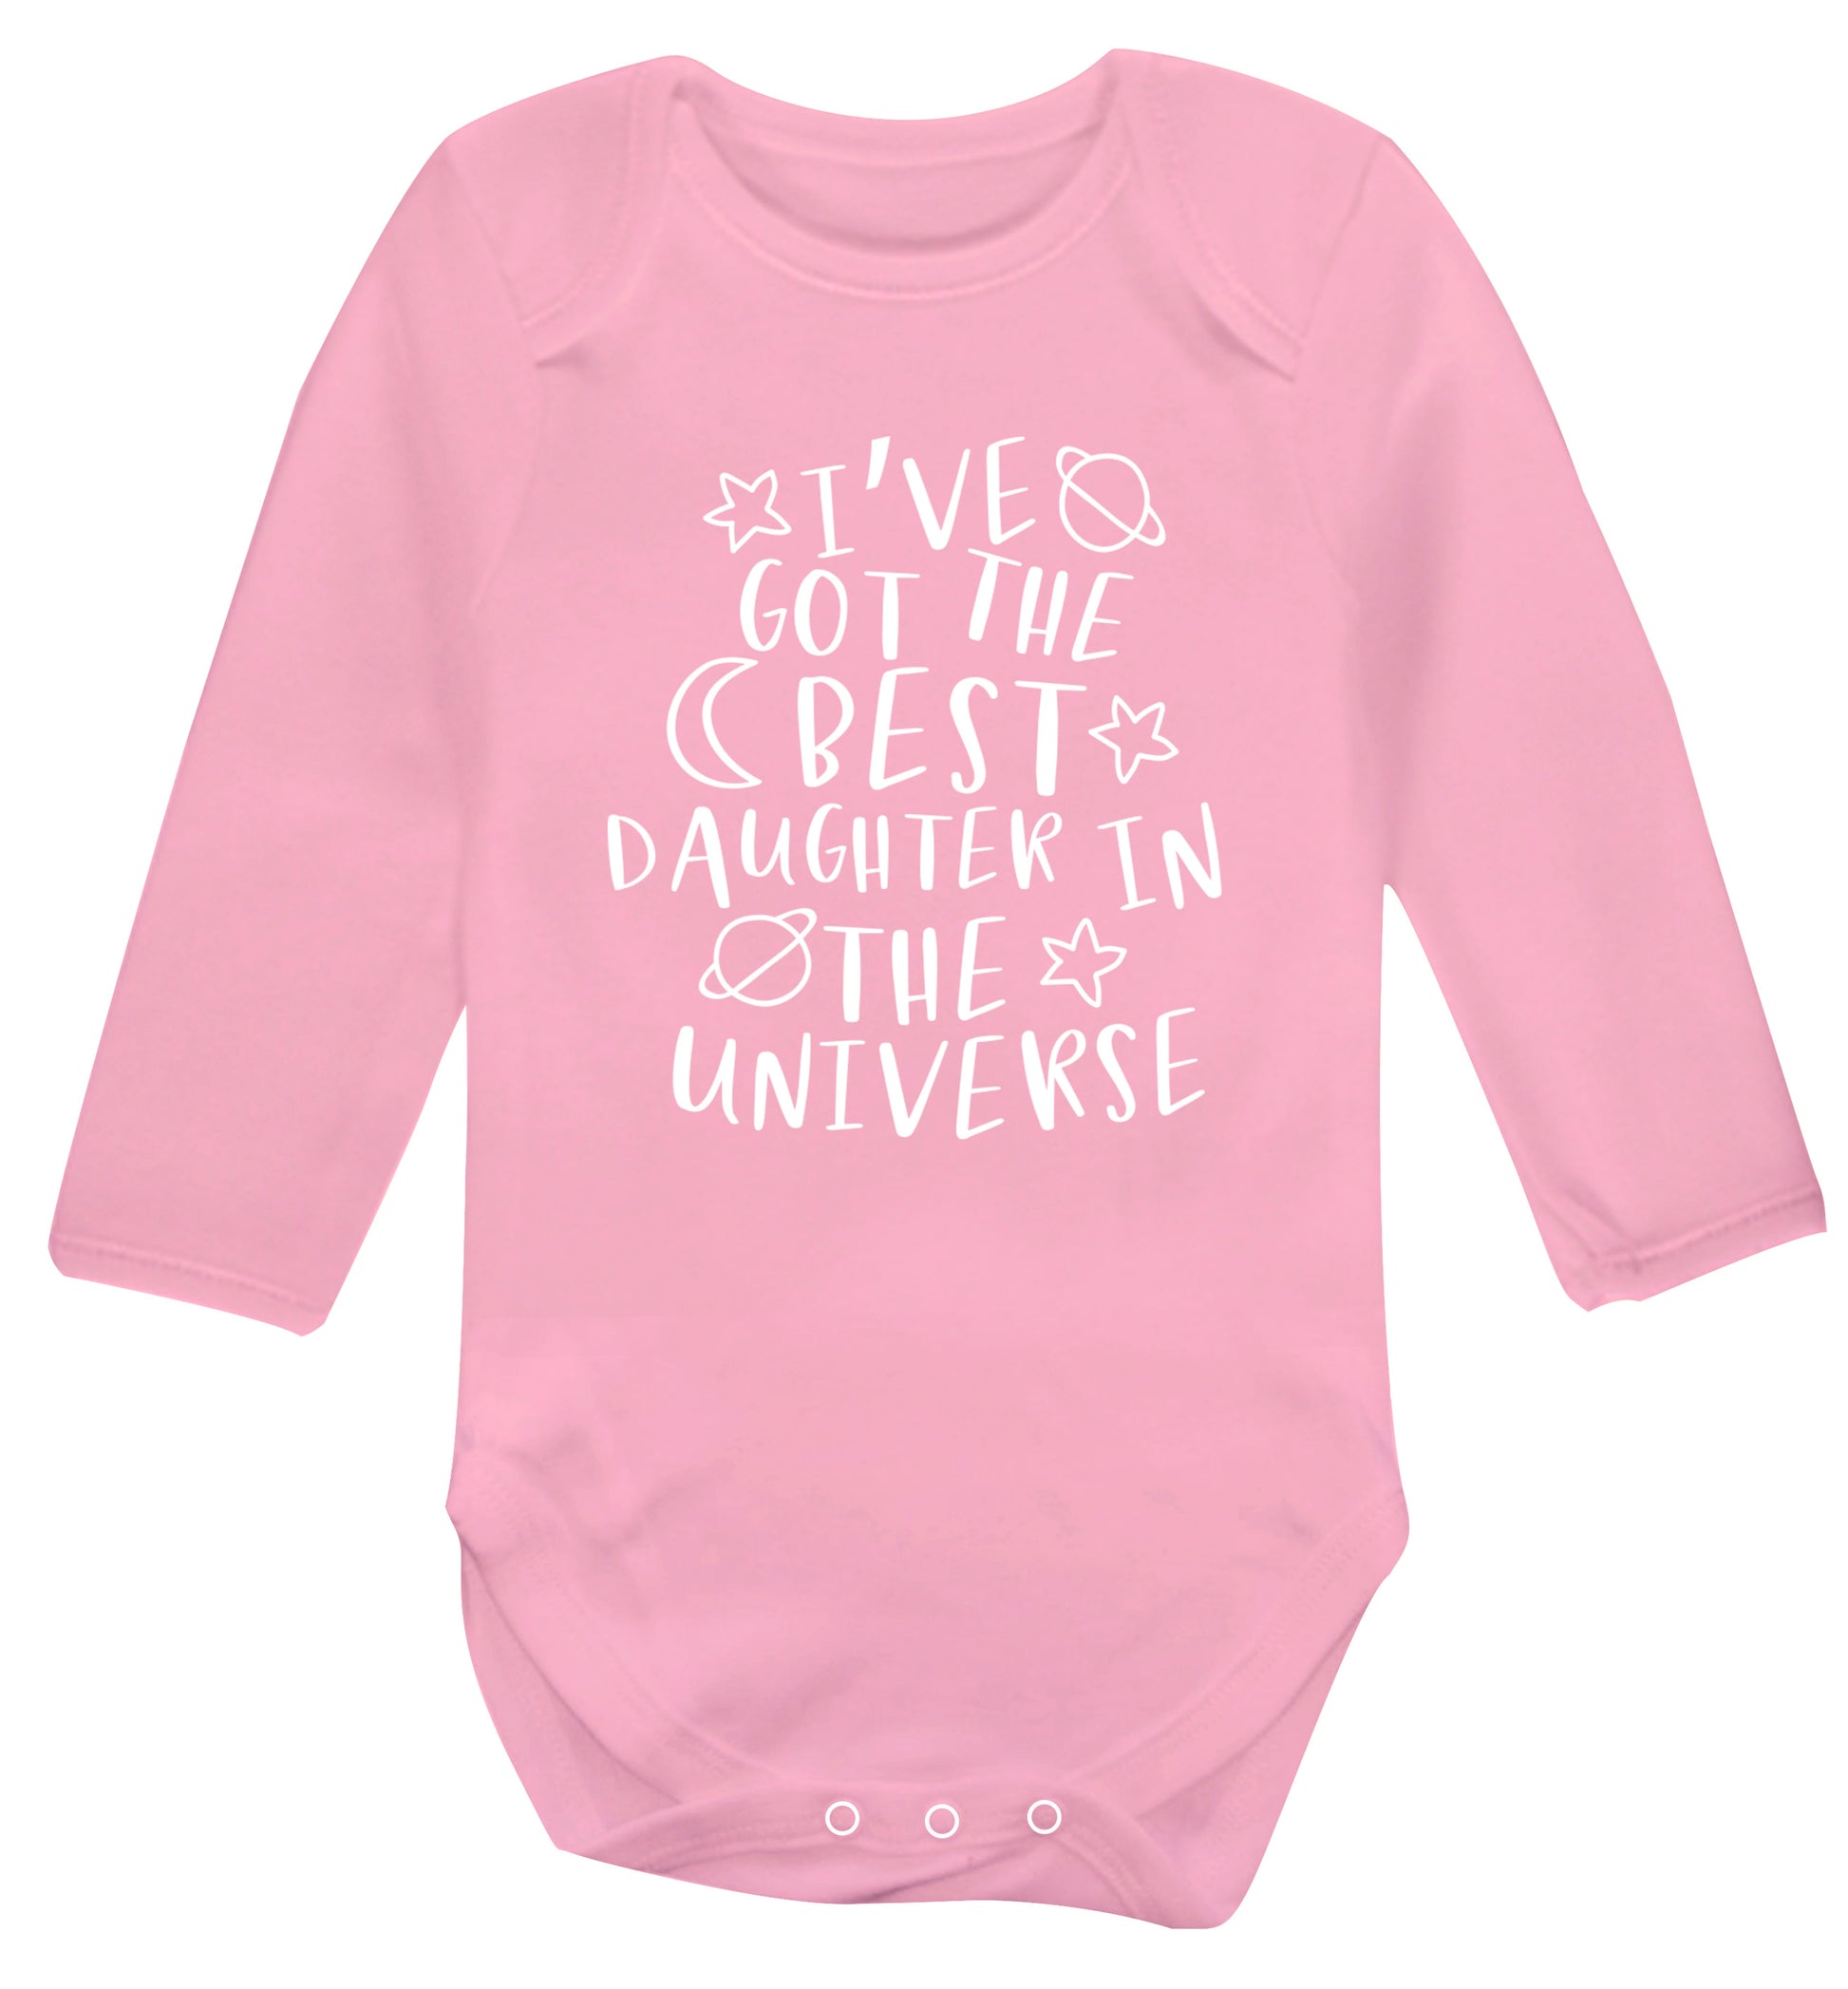 I've got the best daughter in the universe Baby Vest long sleeved pale pink 6-12 months